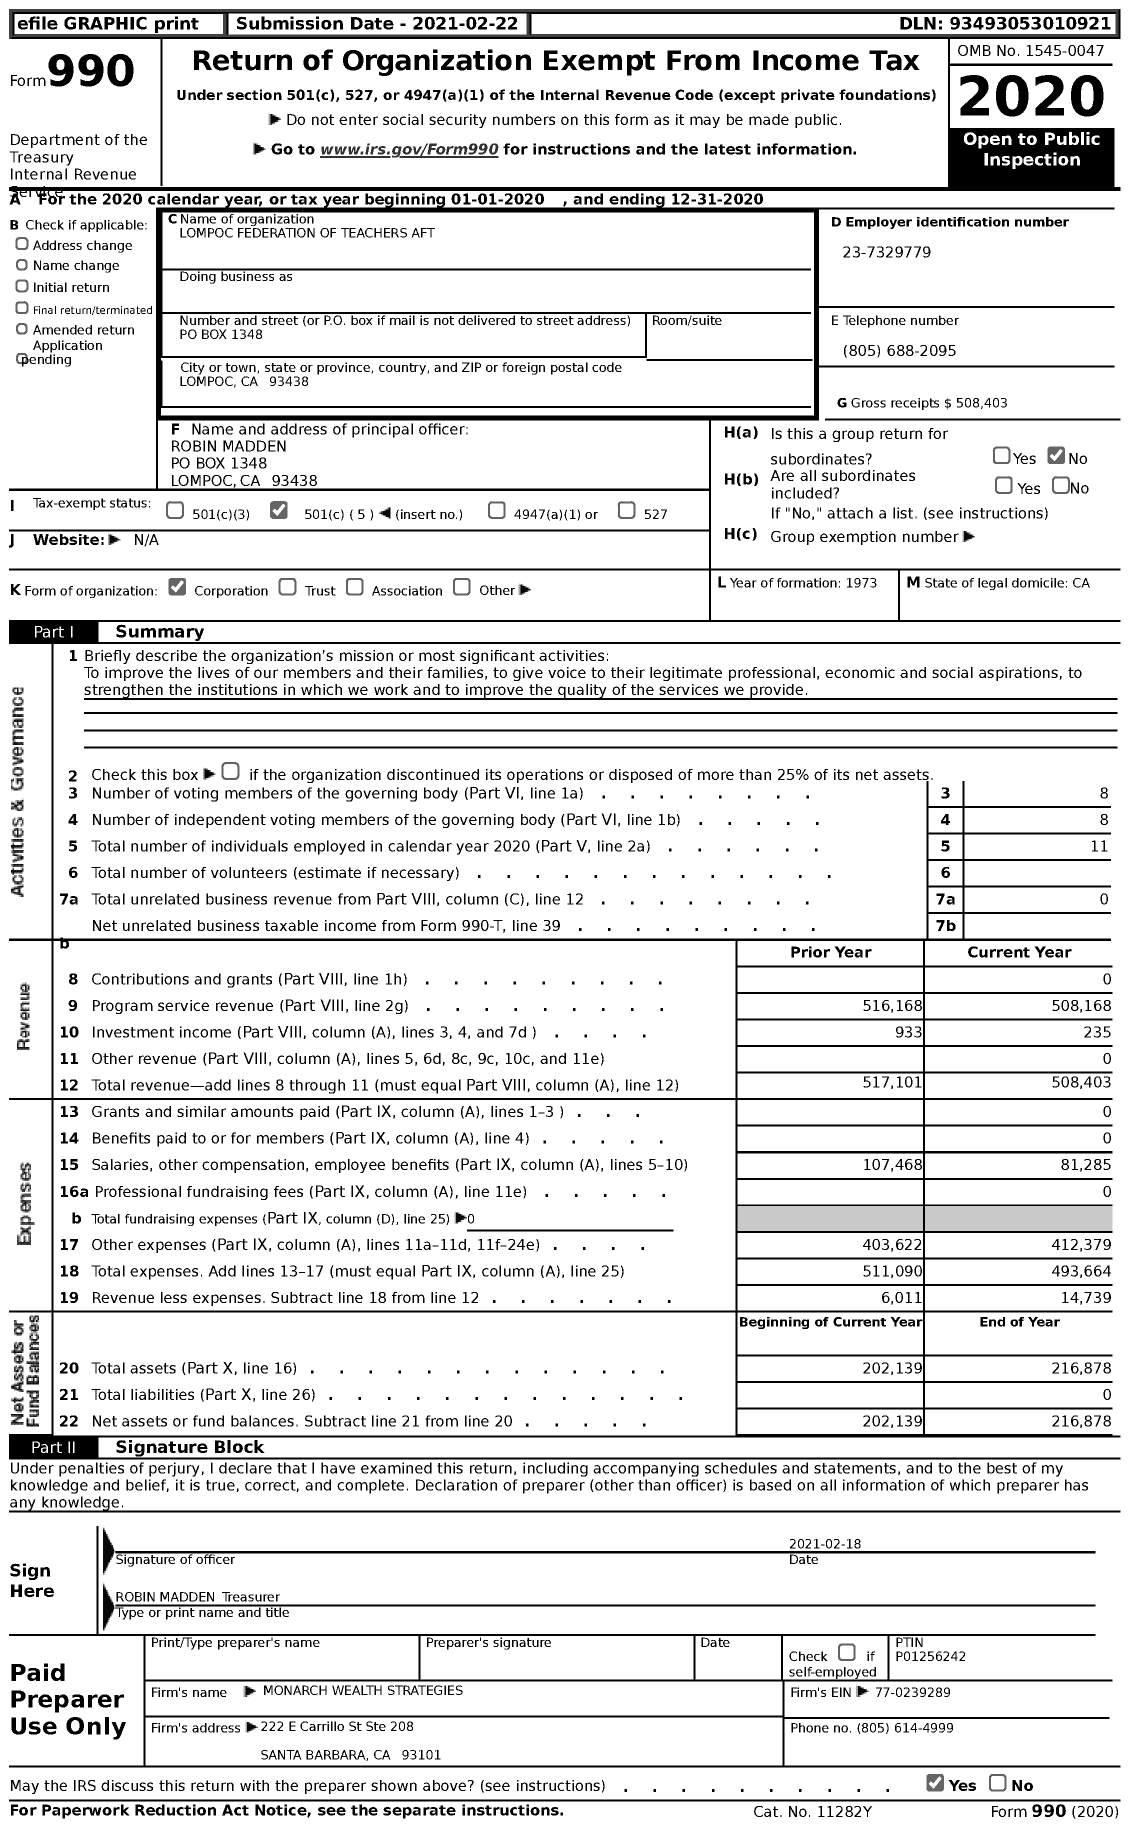 Image of first page of 2020 Form 990 for American Federation of Teachers - 3151 Lompoc Federation